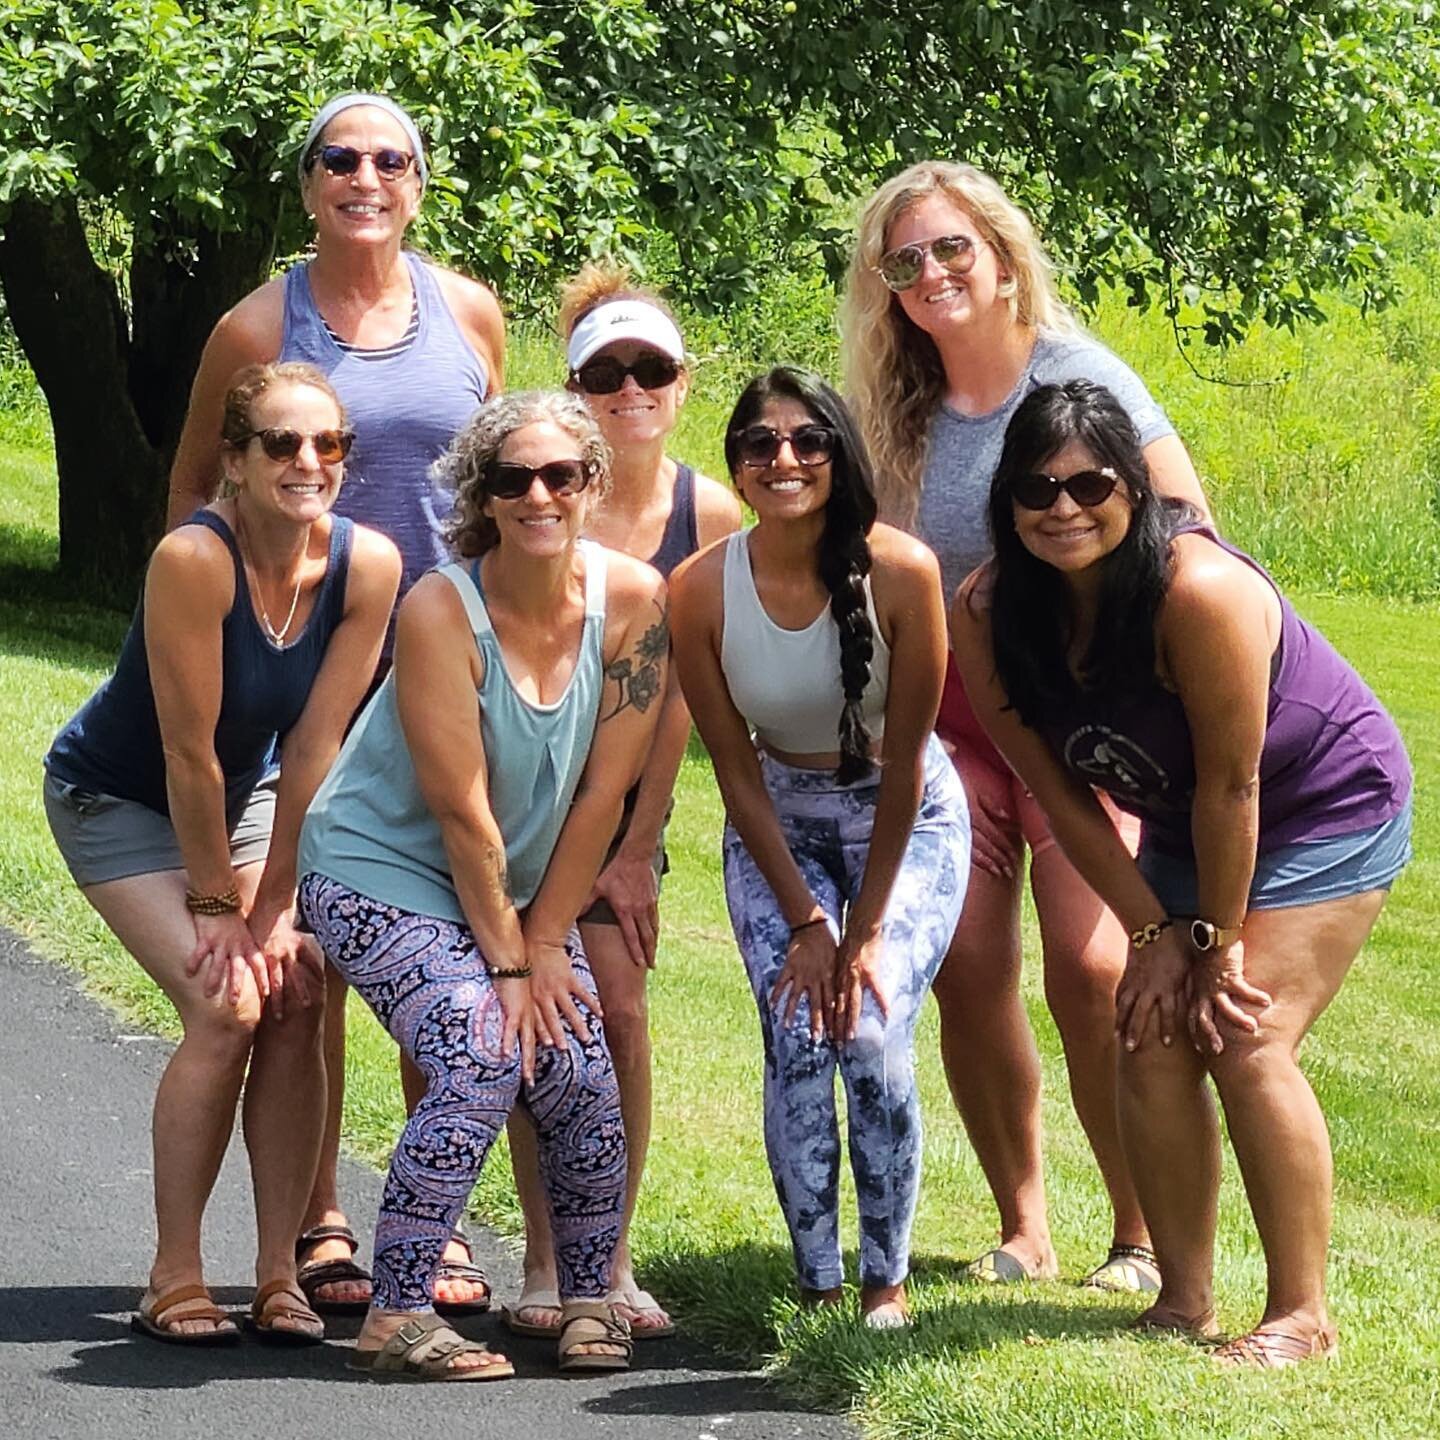 Remembering sunnier days during this rainy weekend&hellip;We recently had the pleasure of hosting this lovely group of women as they attended a yoga retreat led by @yoginigsdlvr 
They had a great time and are even thinking about a return visit!

We a